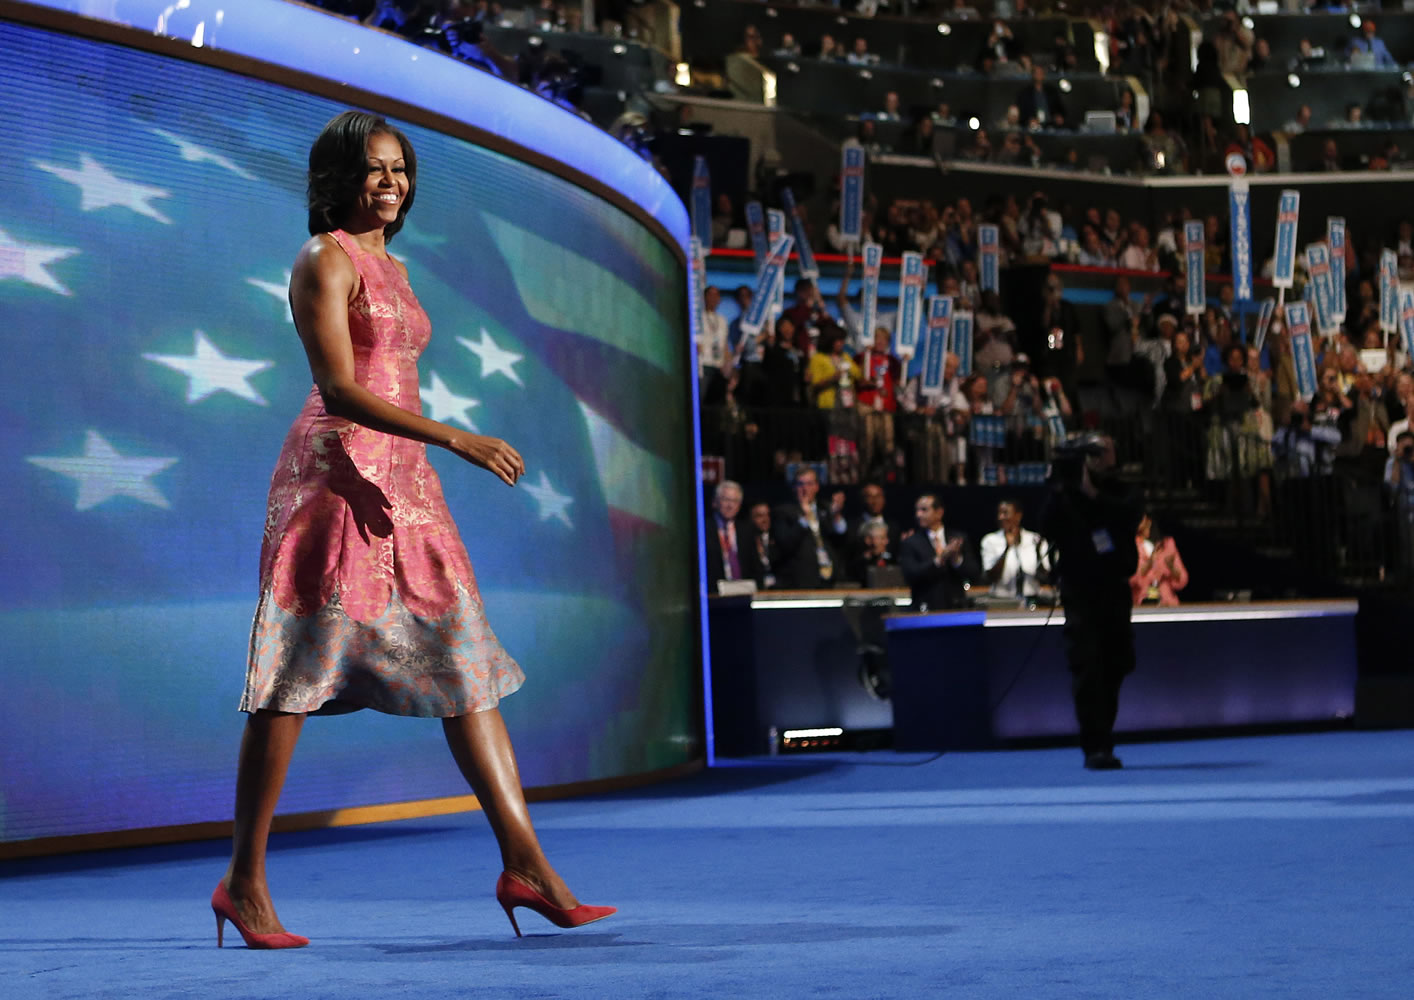 FILE - In this Tuesday, Sept. 4, 2012 file photo, first lady Michelle Obama walks onto the stage at the Democratic National Convention in Charlotte, N.C.  Obama's dress was designed by Tracy Reese. Obama has proven her fashion savvy time and time again since she was introduced to the country as first lady on Inauguration Day 2009. In the past four years she has adeptly walked the line between directional fashionista and everywoman. (AP Photo/Jae C.